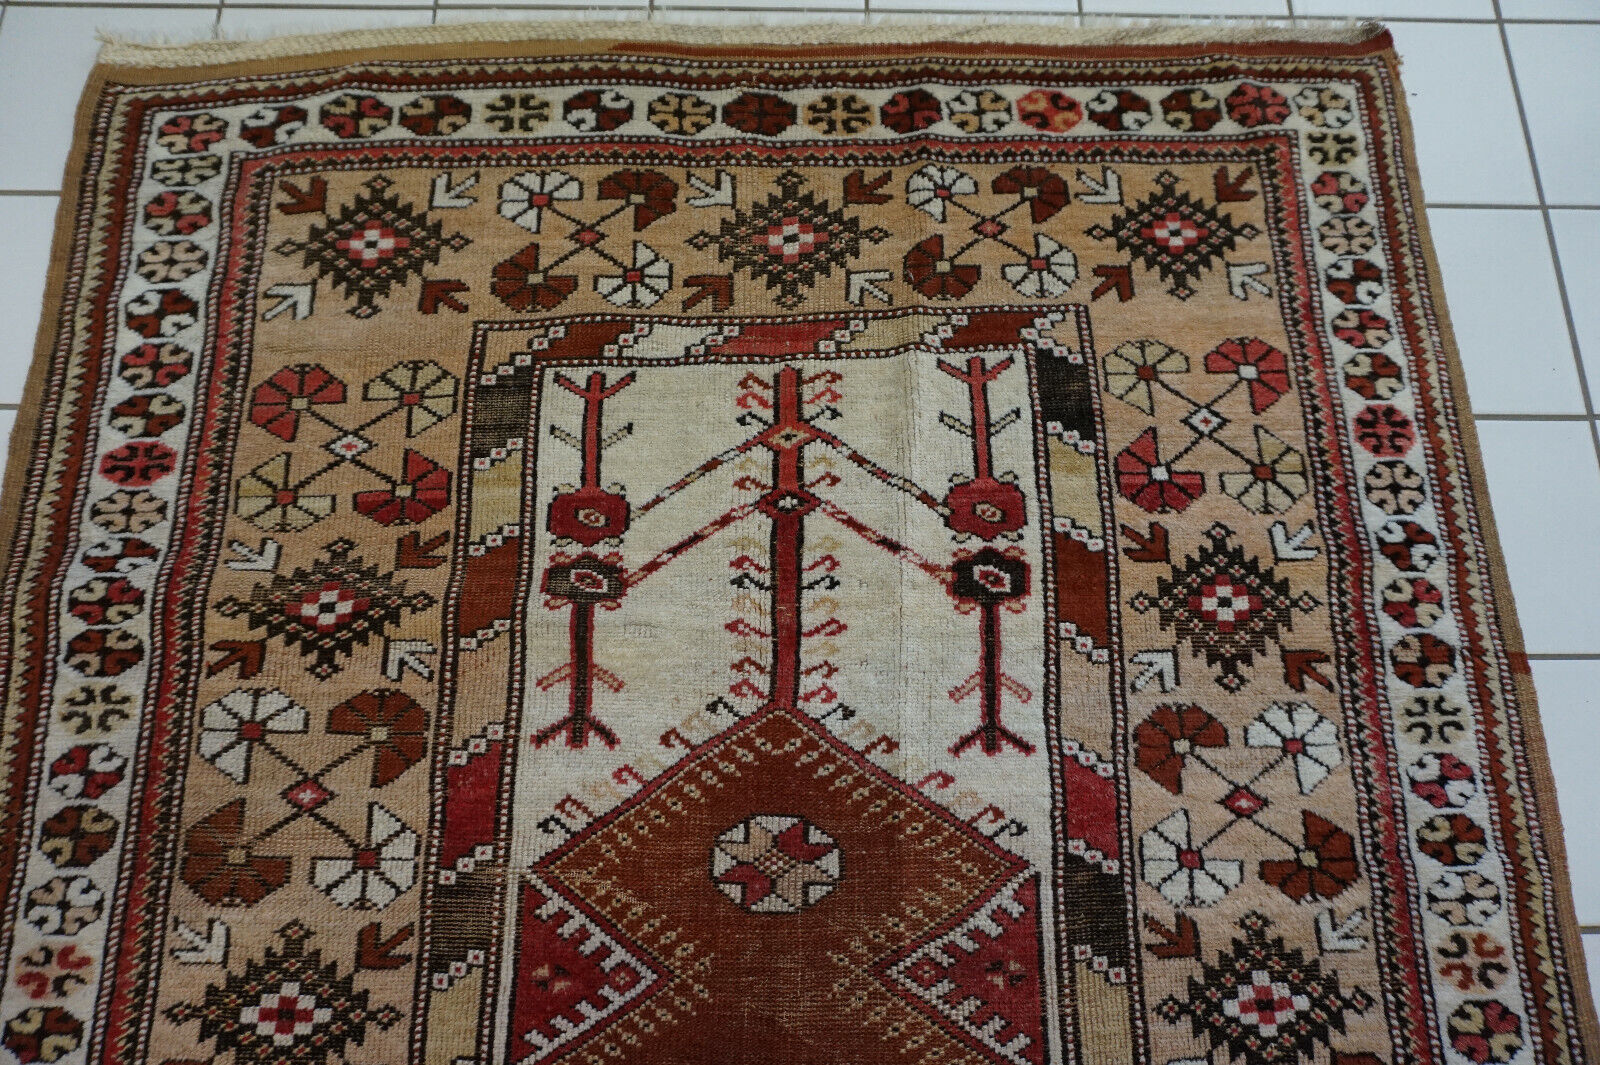 Front view of the Handmade Traditional Turkish Melas Rug highlighting its cultural heritage